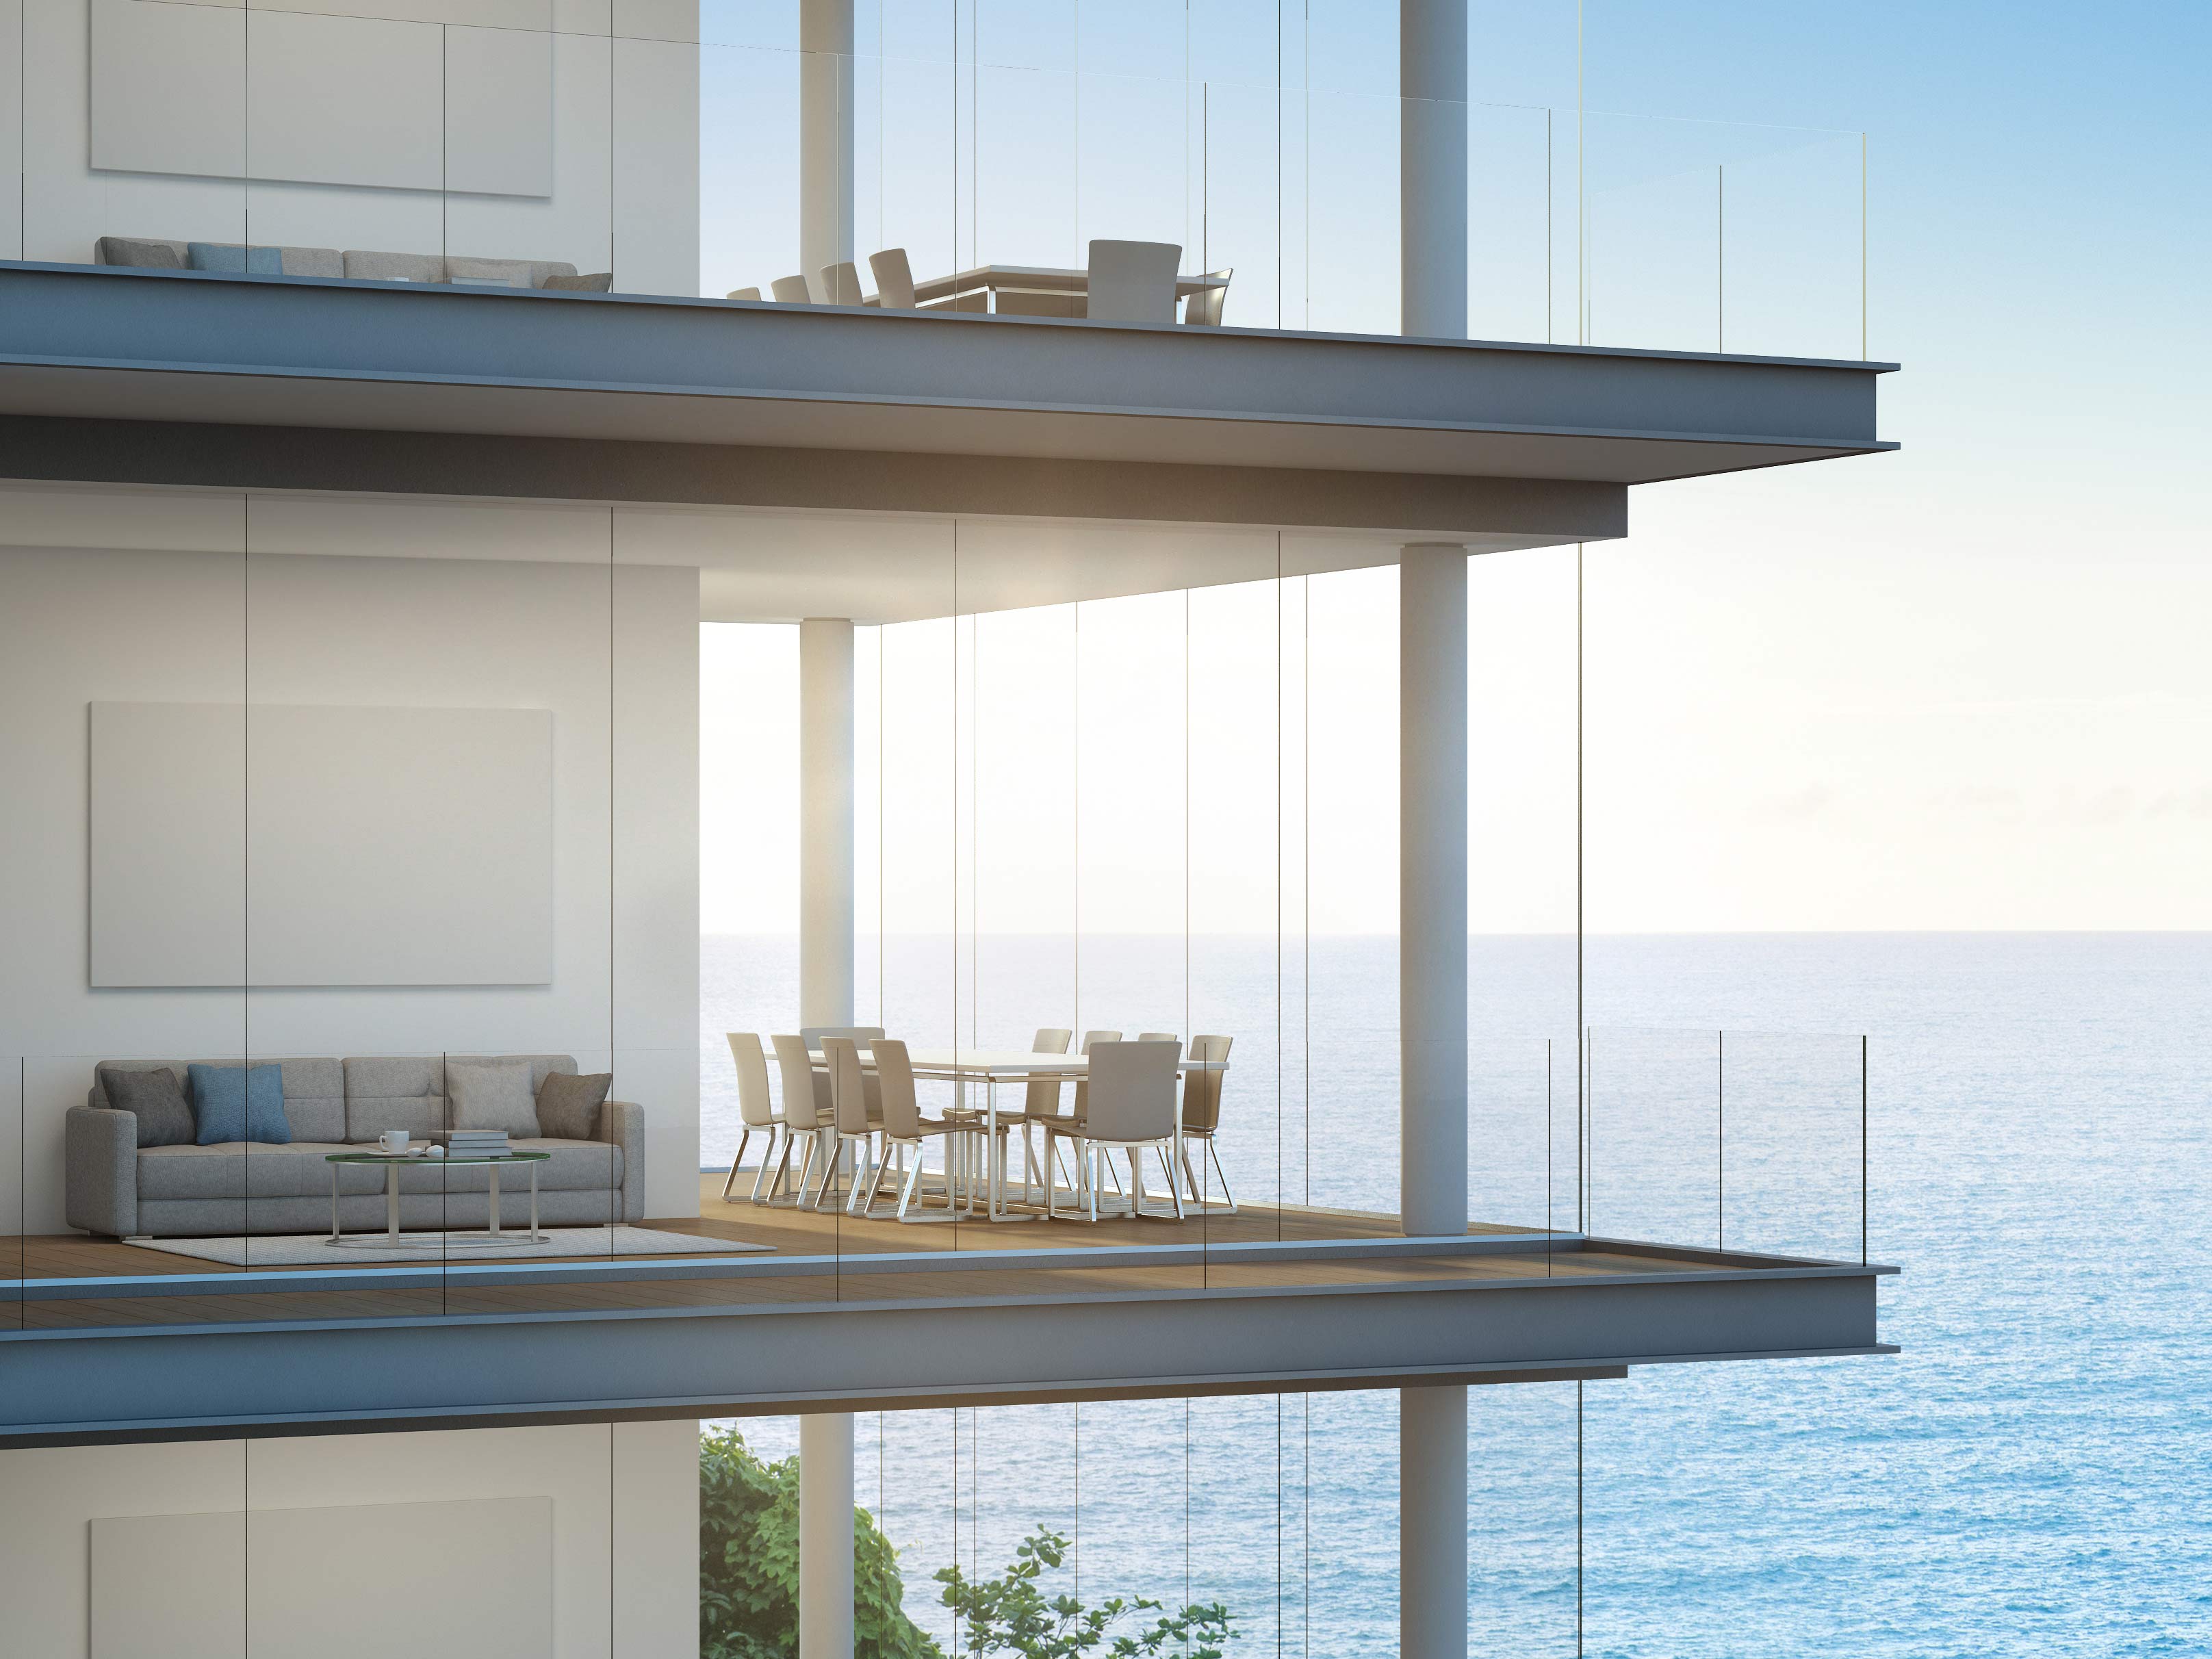 Luxury developments: Delivering the vision (Part 3)